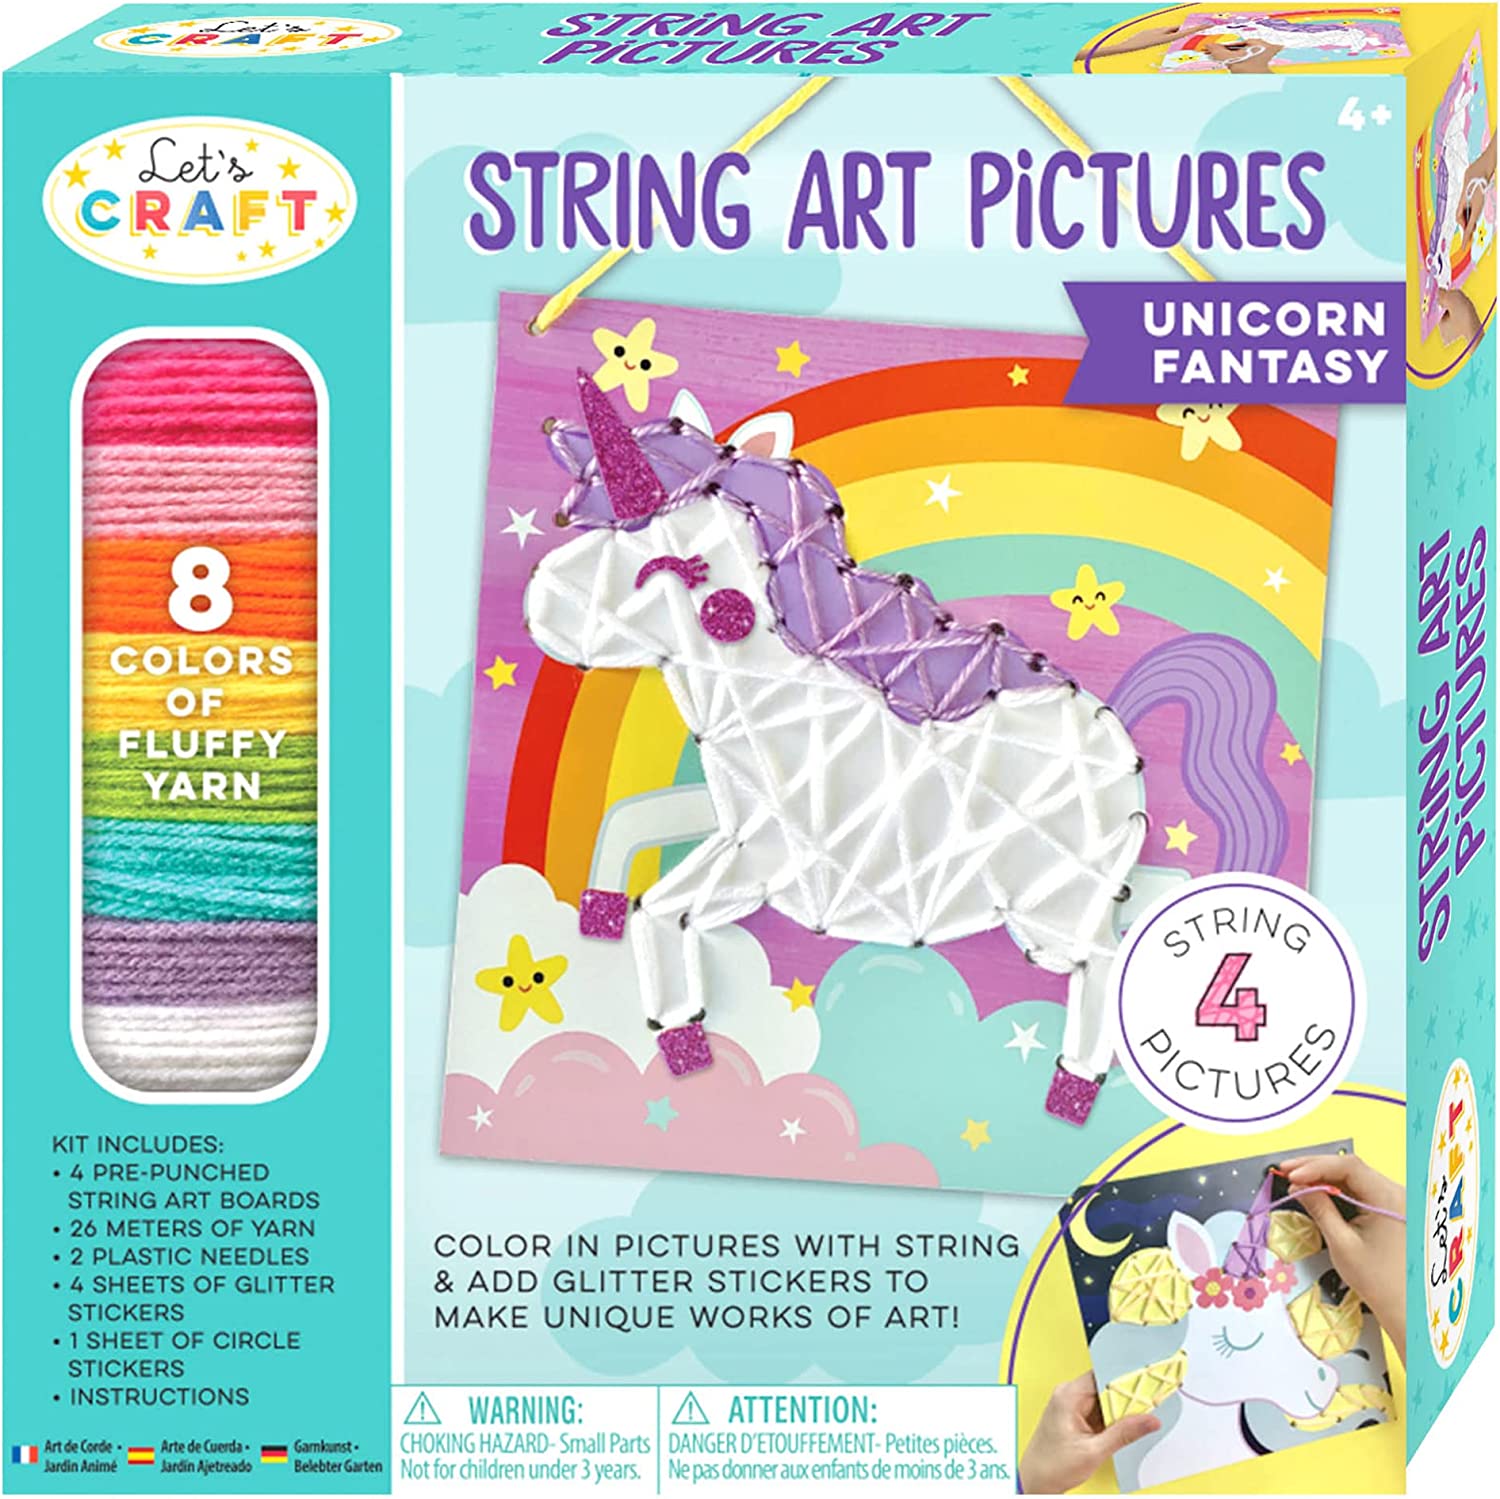 Let's Craft String Art Pictures Unicorn Fantasy – Klubhouse for Kids